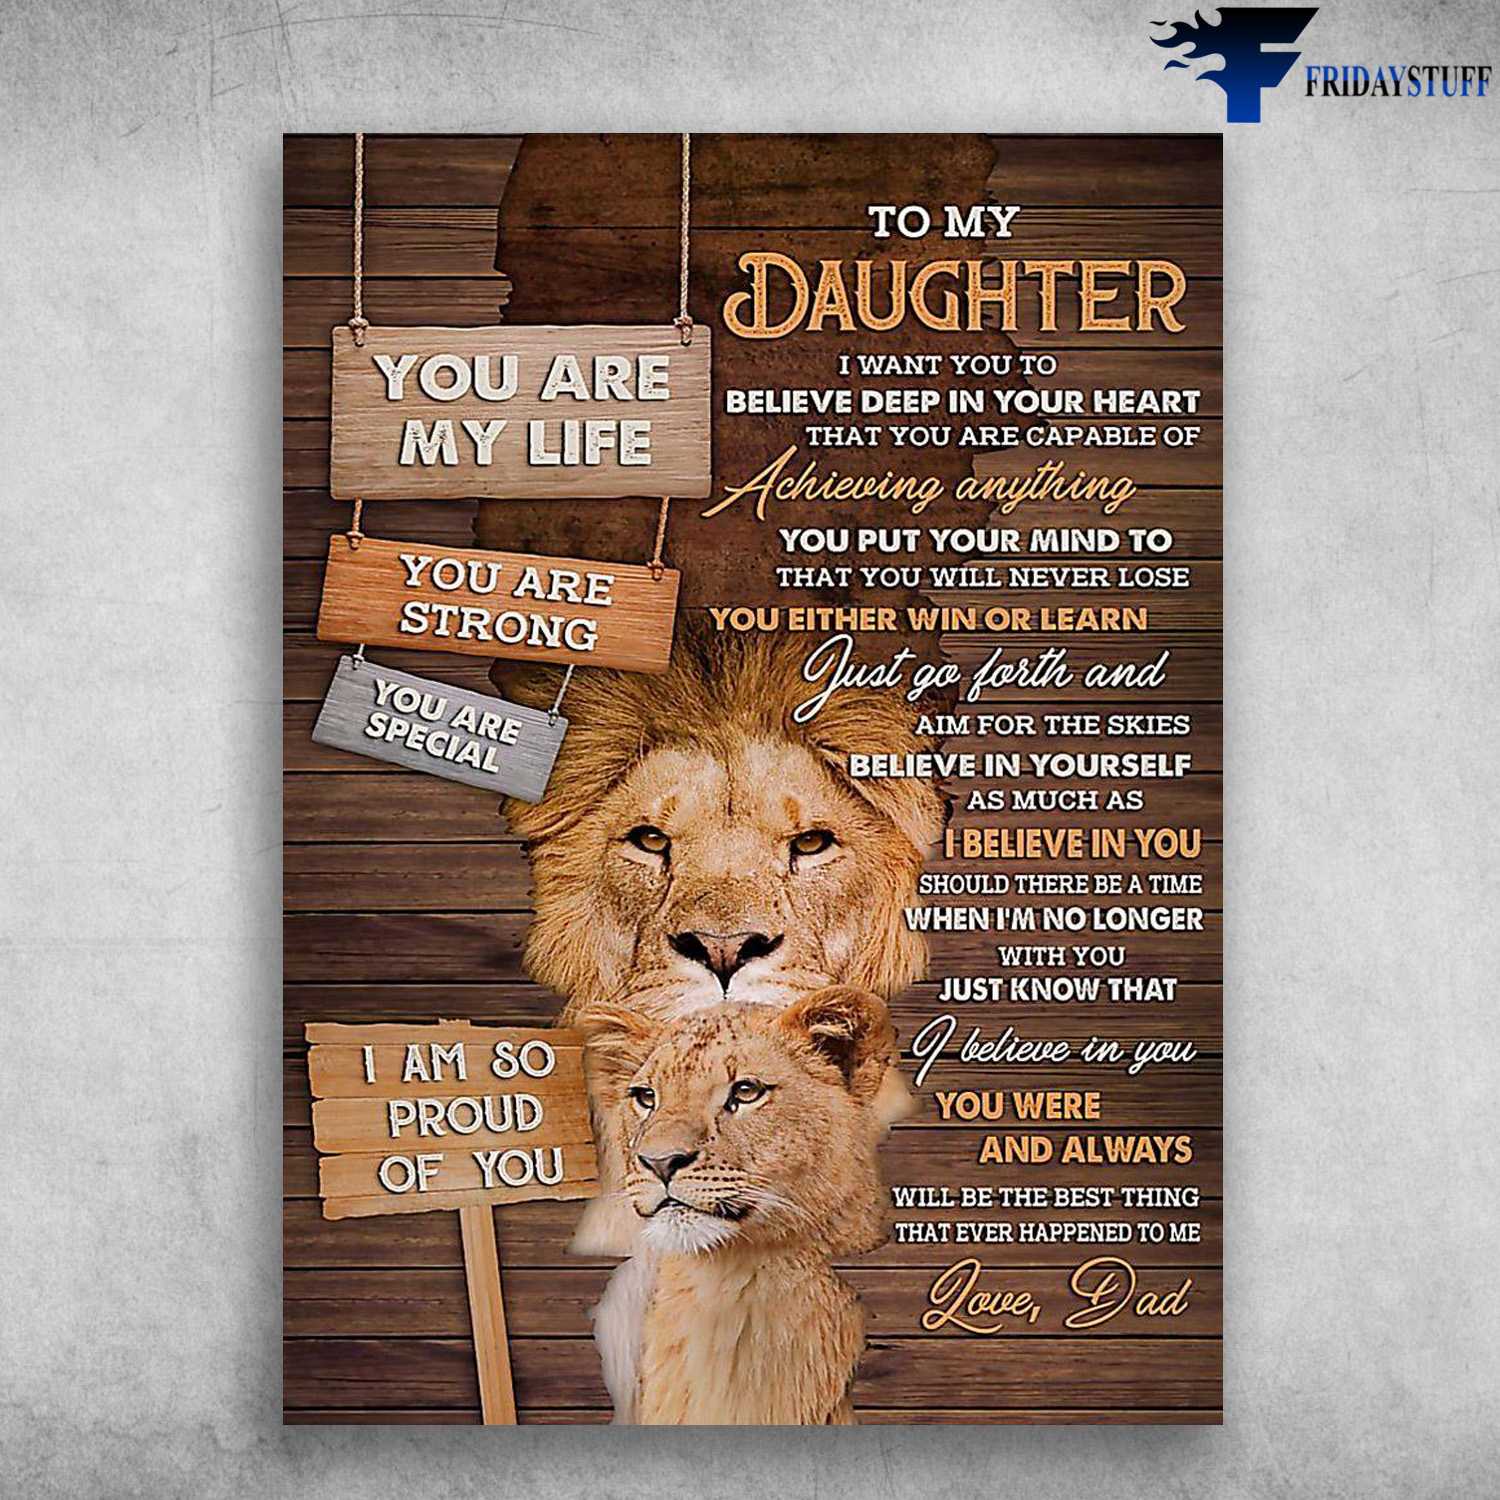 Dad And Daughter, To My Daughter, Lion Poster, To My Daughter, I Want You To Believe Deep In Your Heart That, You Are Capable Of Achieving Anything, You Put Your Mind To That, You Will Never Lose